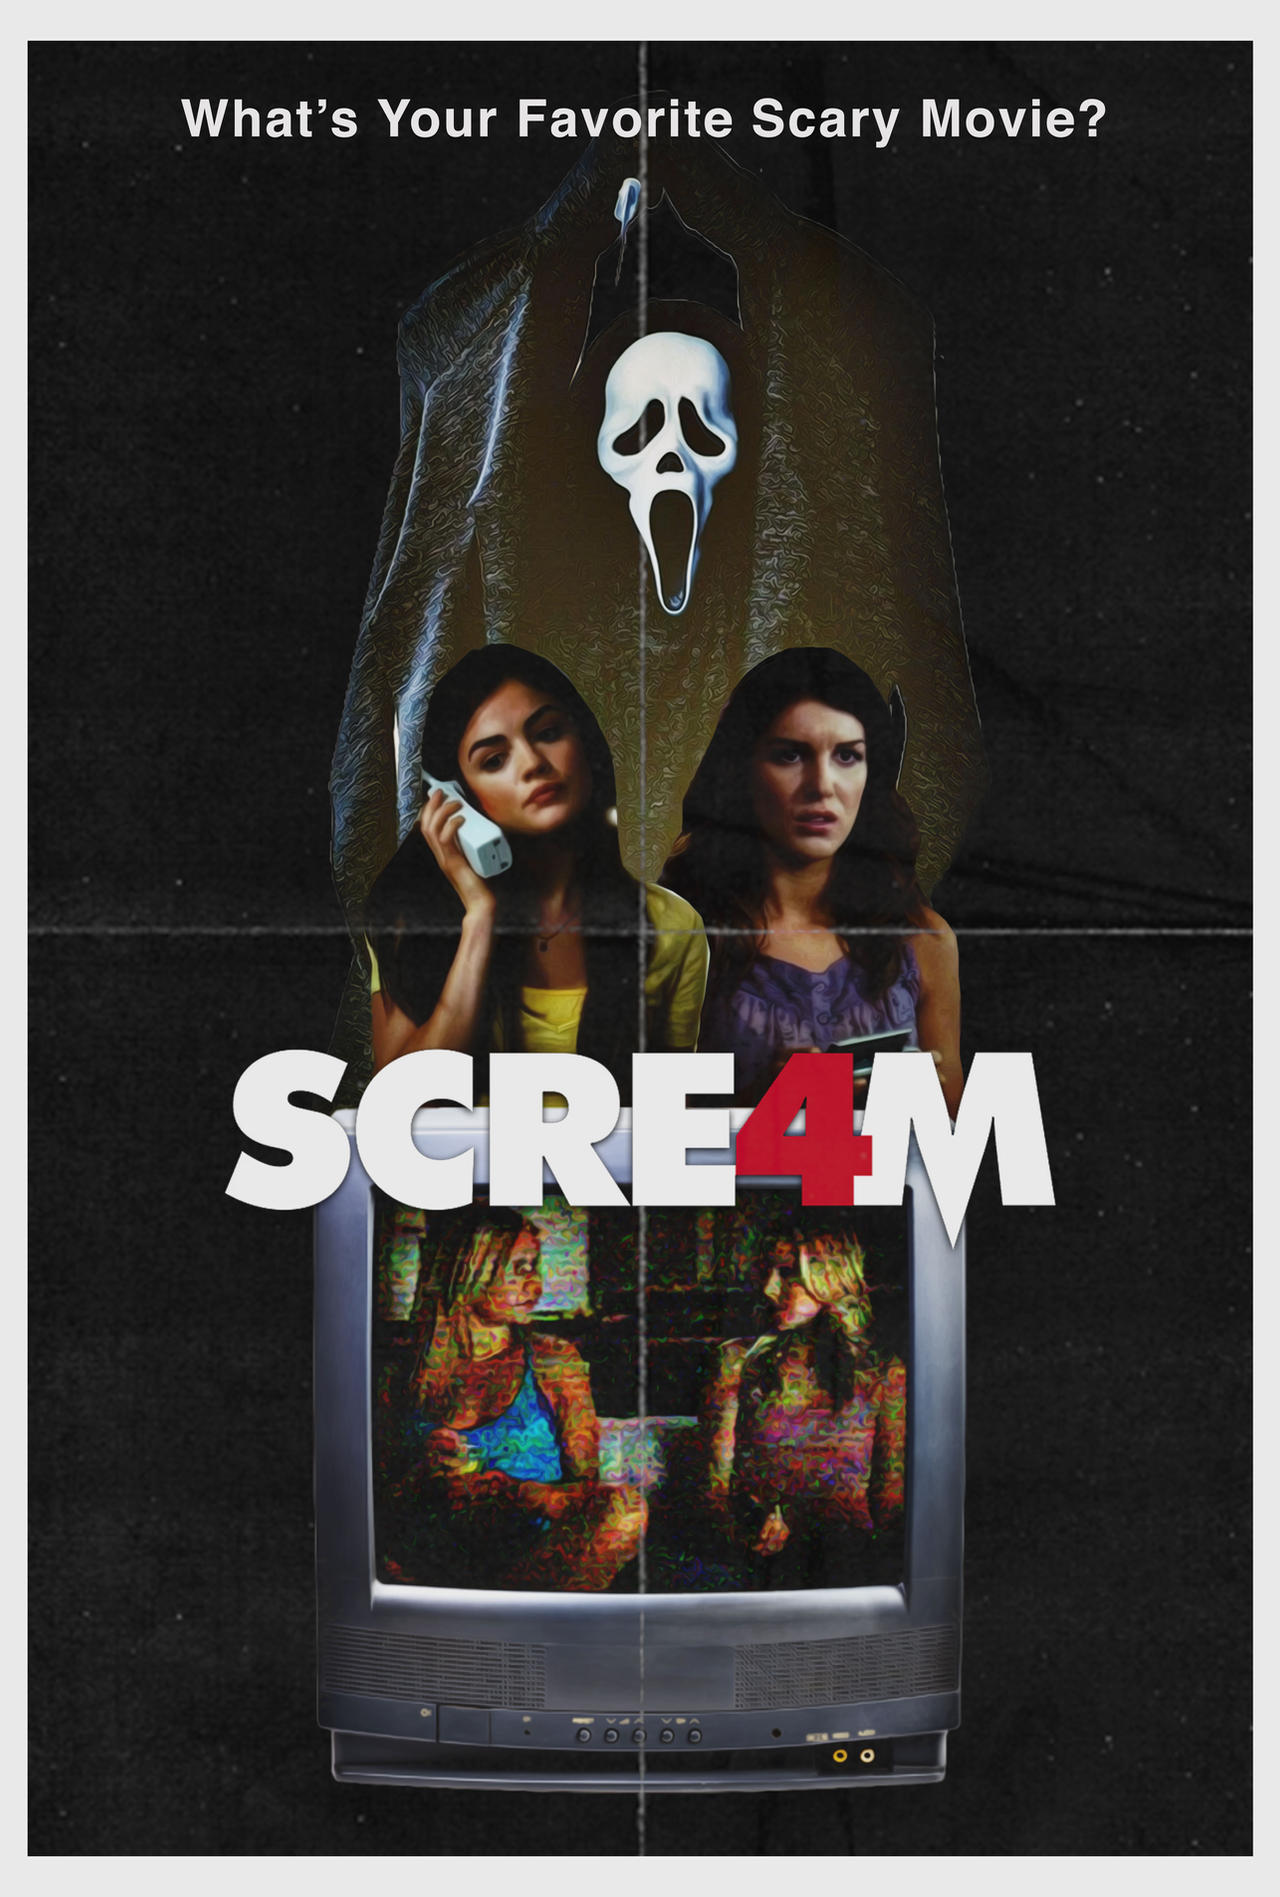 Scre4m' Theatrical Poster by themadbutcher on DeviantArt